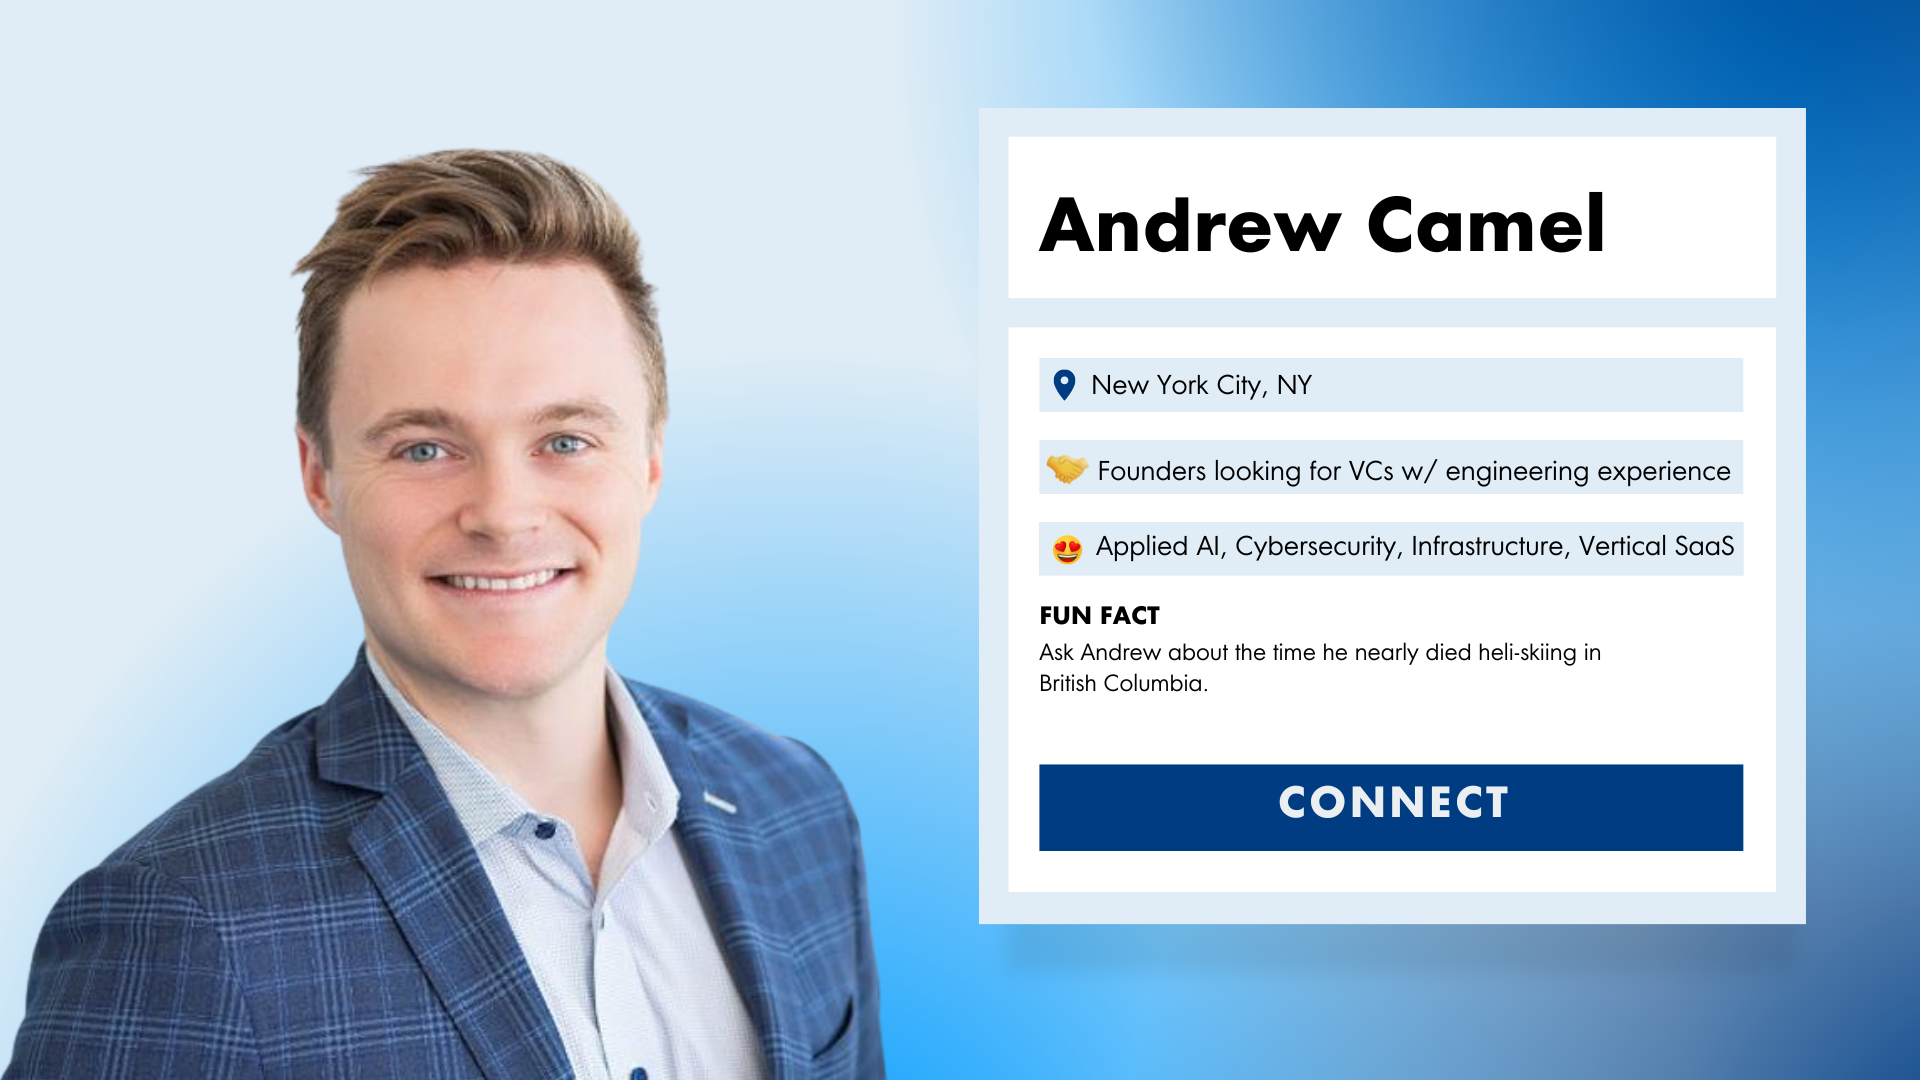 Image and infographic of Andrew Camel, a vice president on the investment team at OpenView.